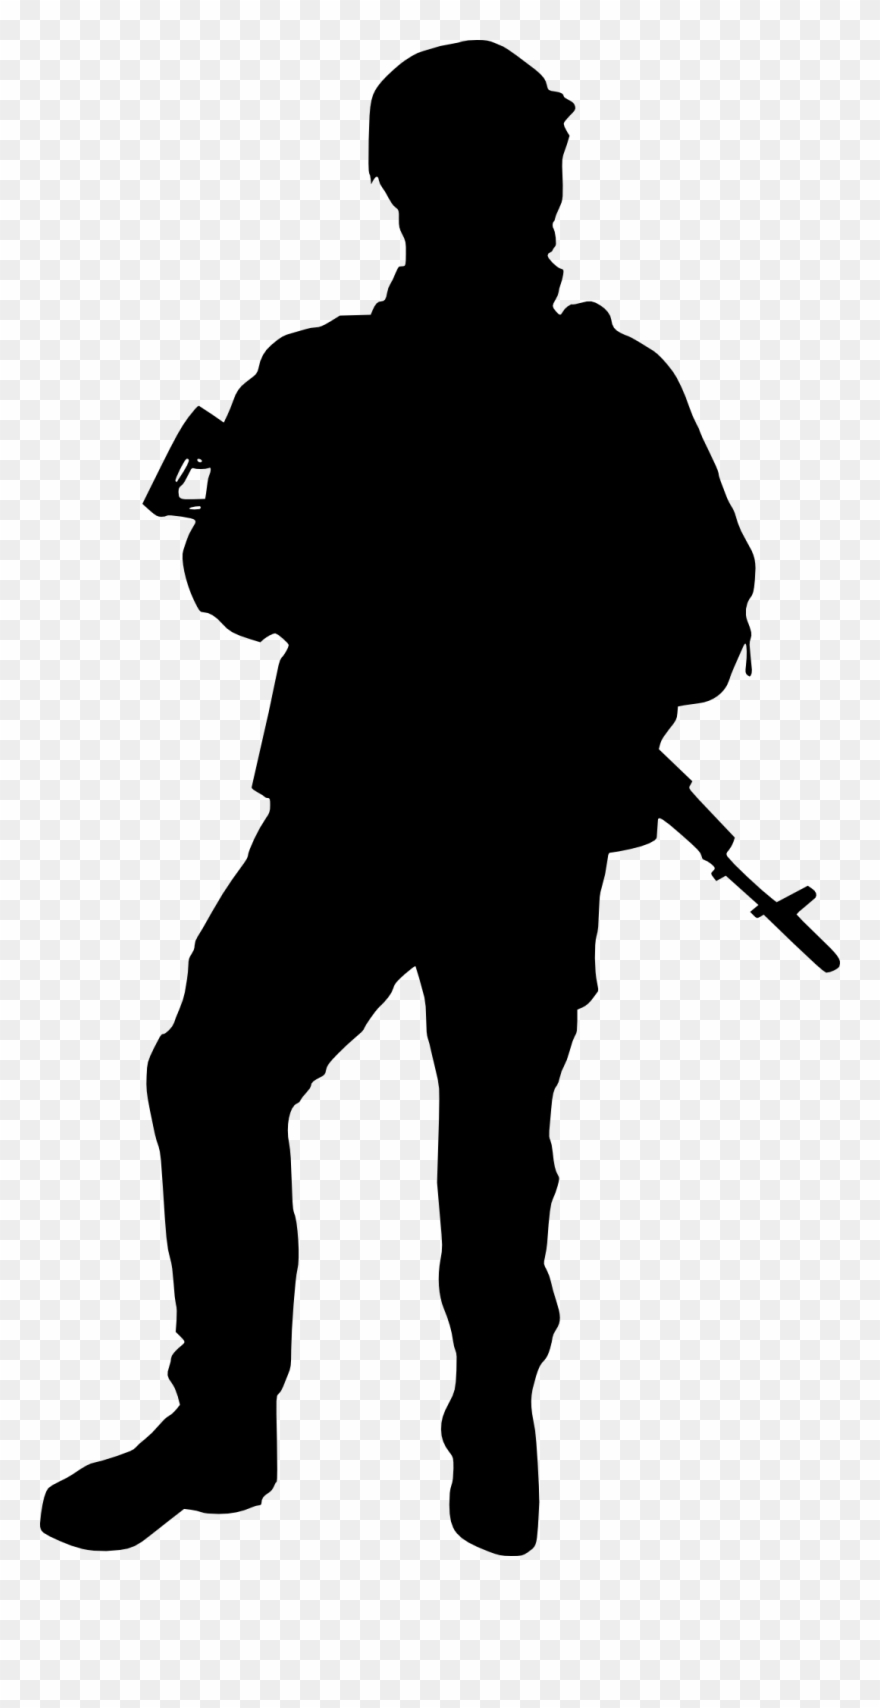 Soldiers Clip Art At Getdrawings Com Free.